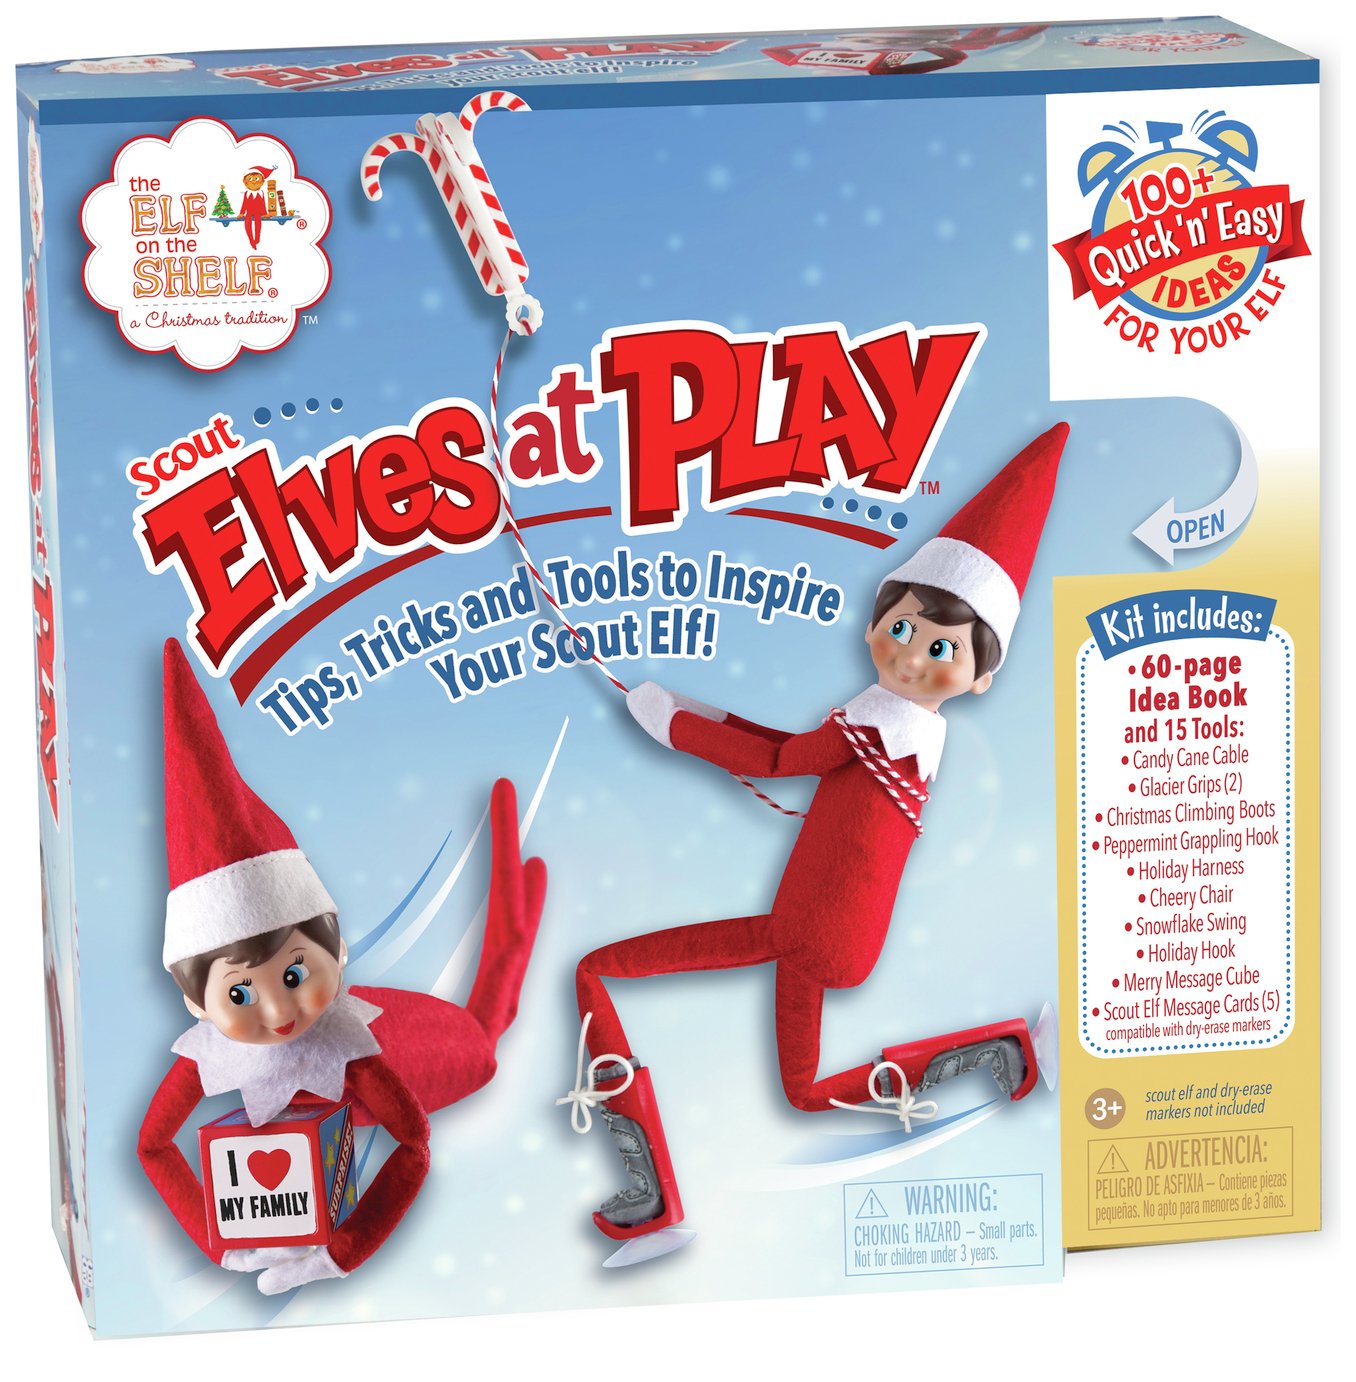 The Elf on the Shelf Elves at Play